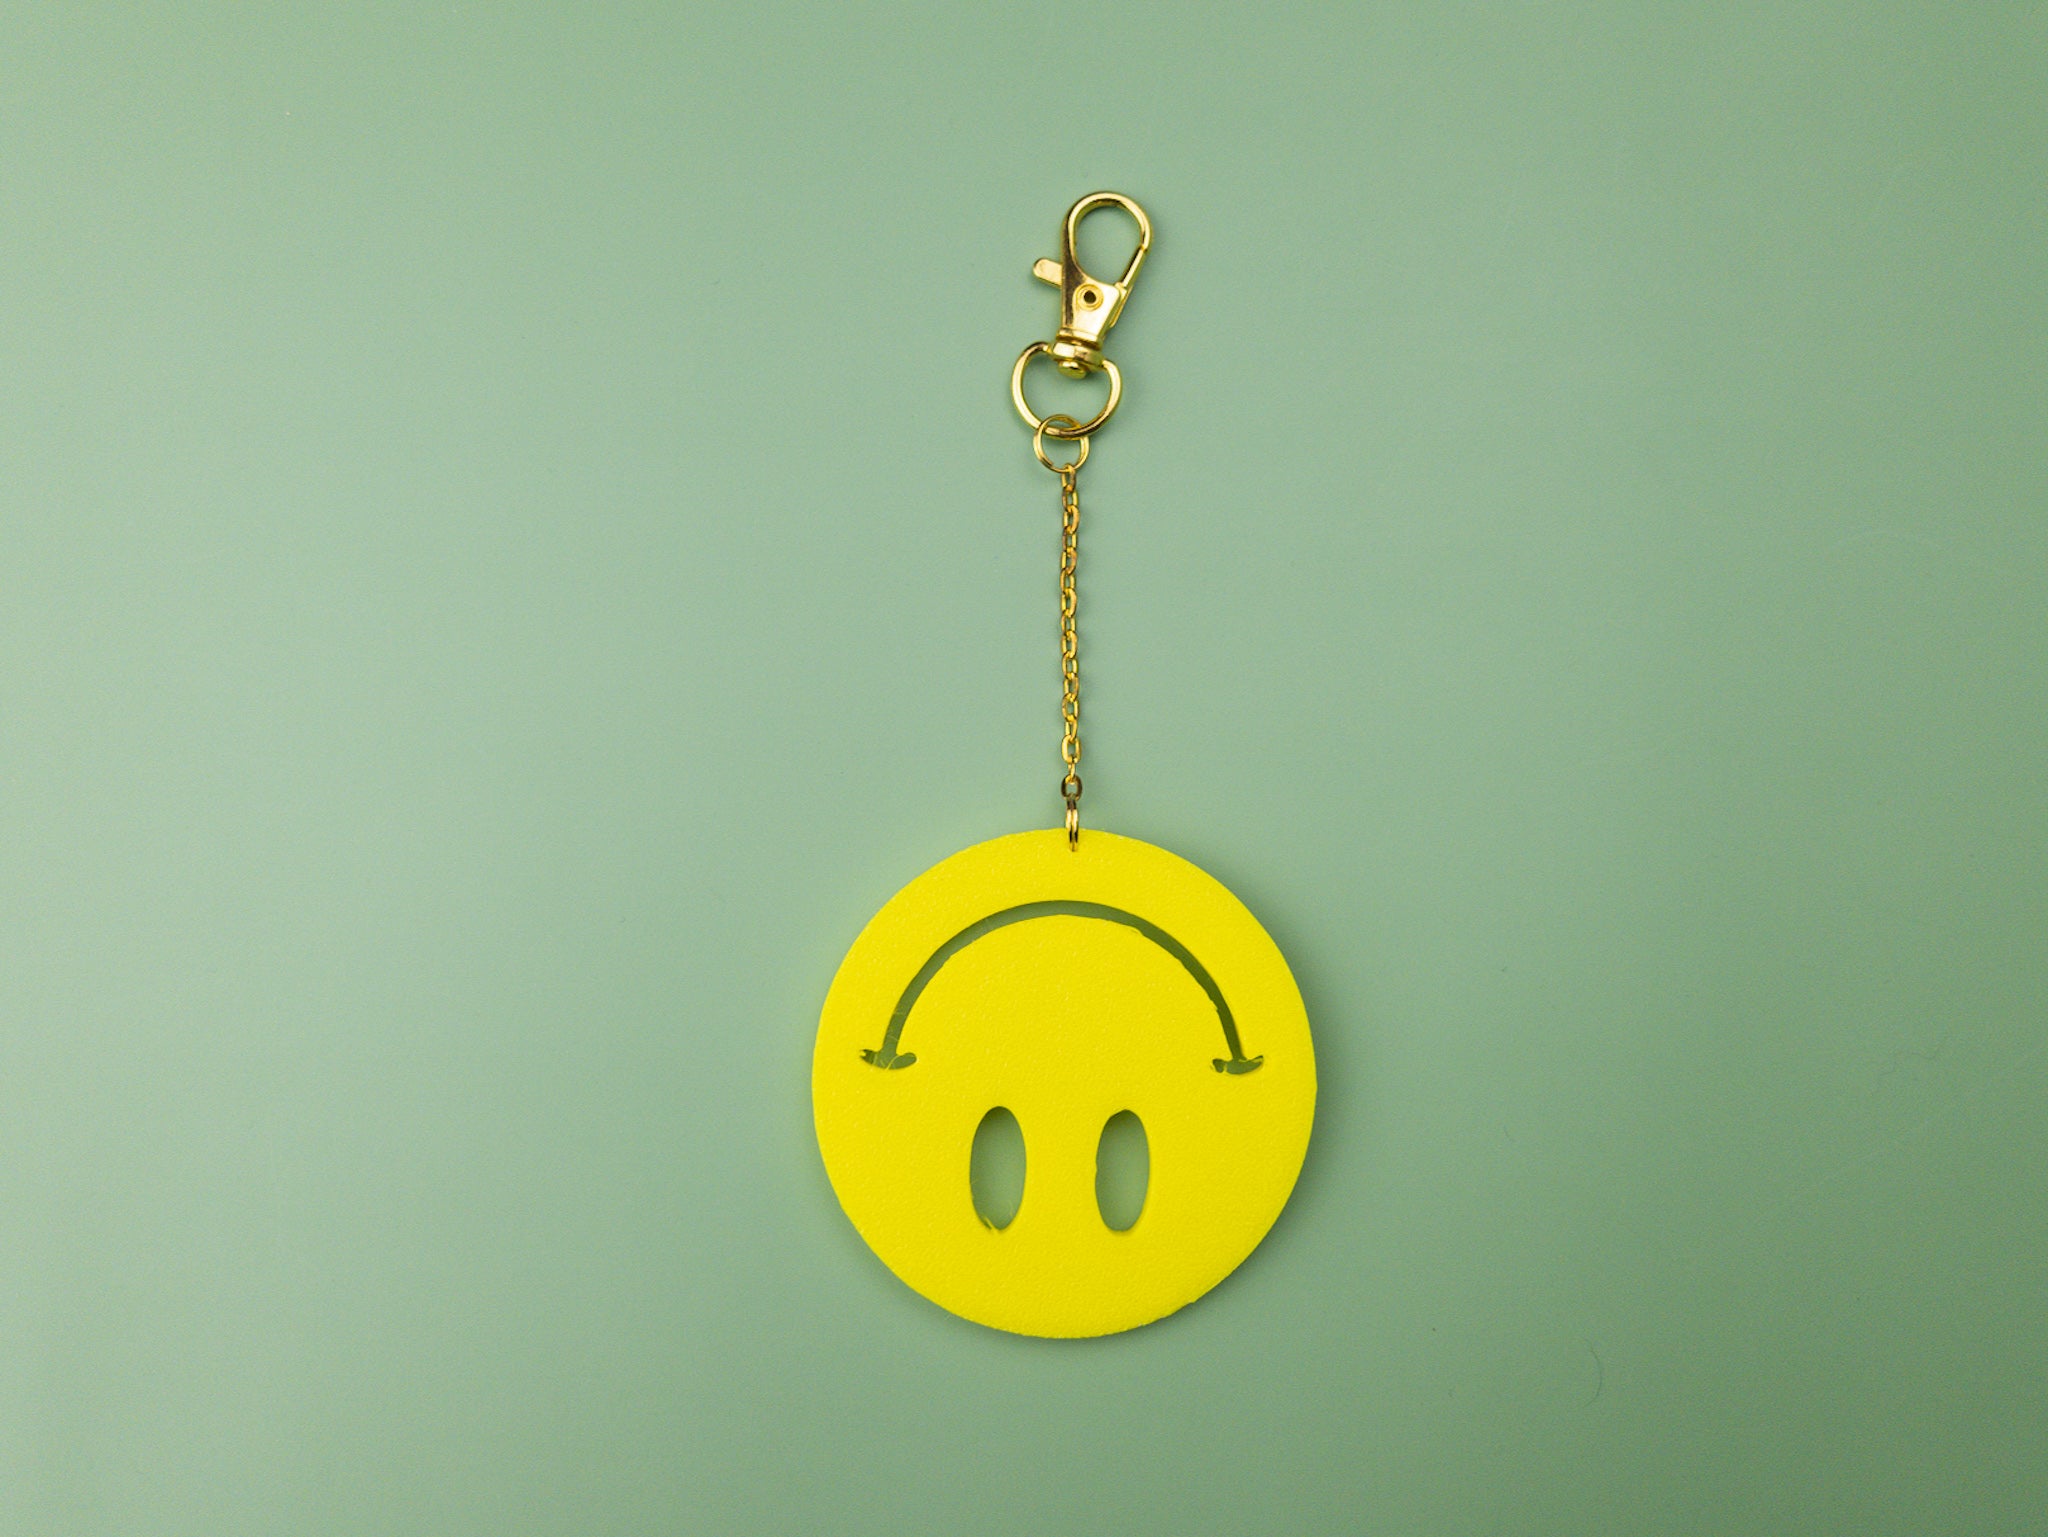 Upside Down Smiley Face Keychain